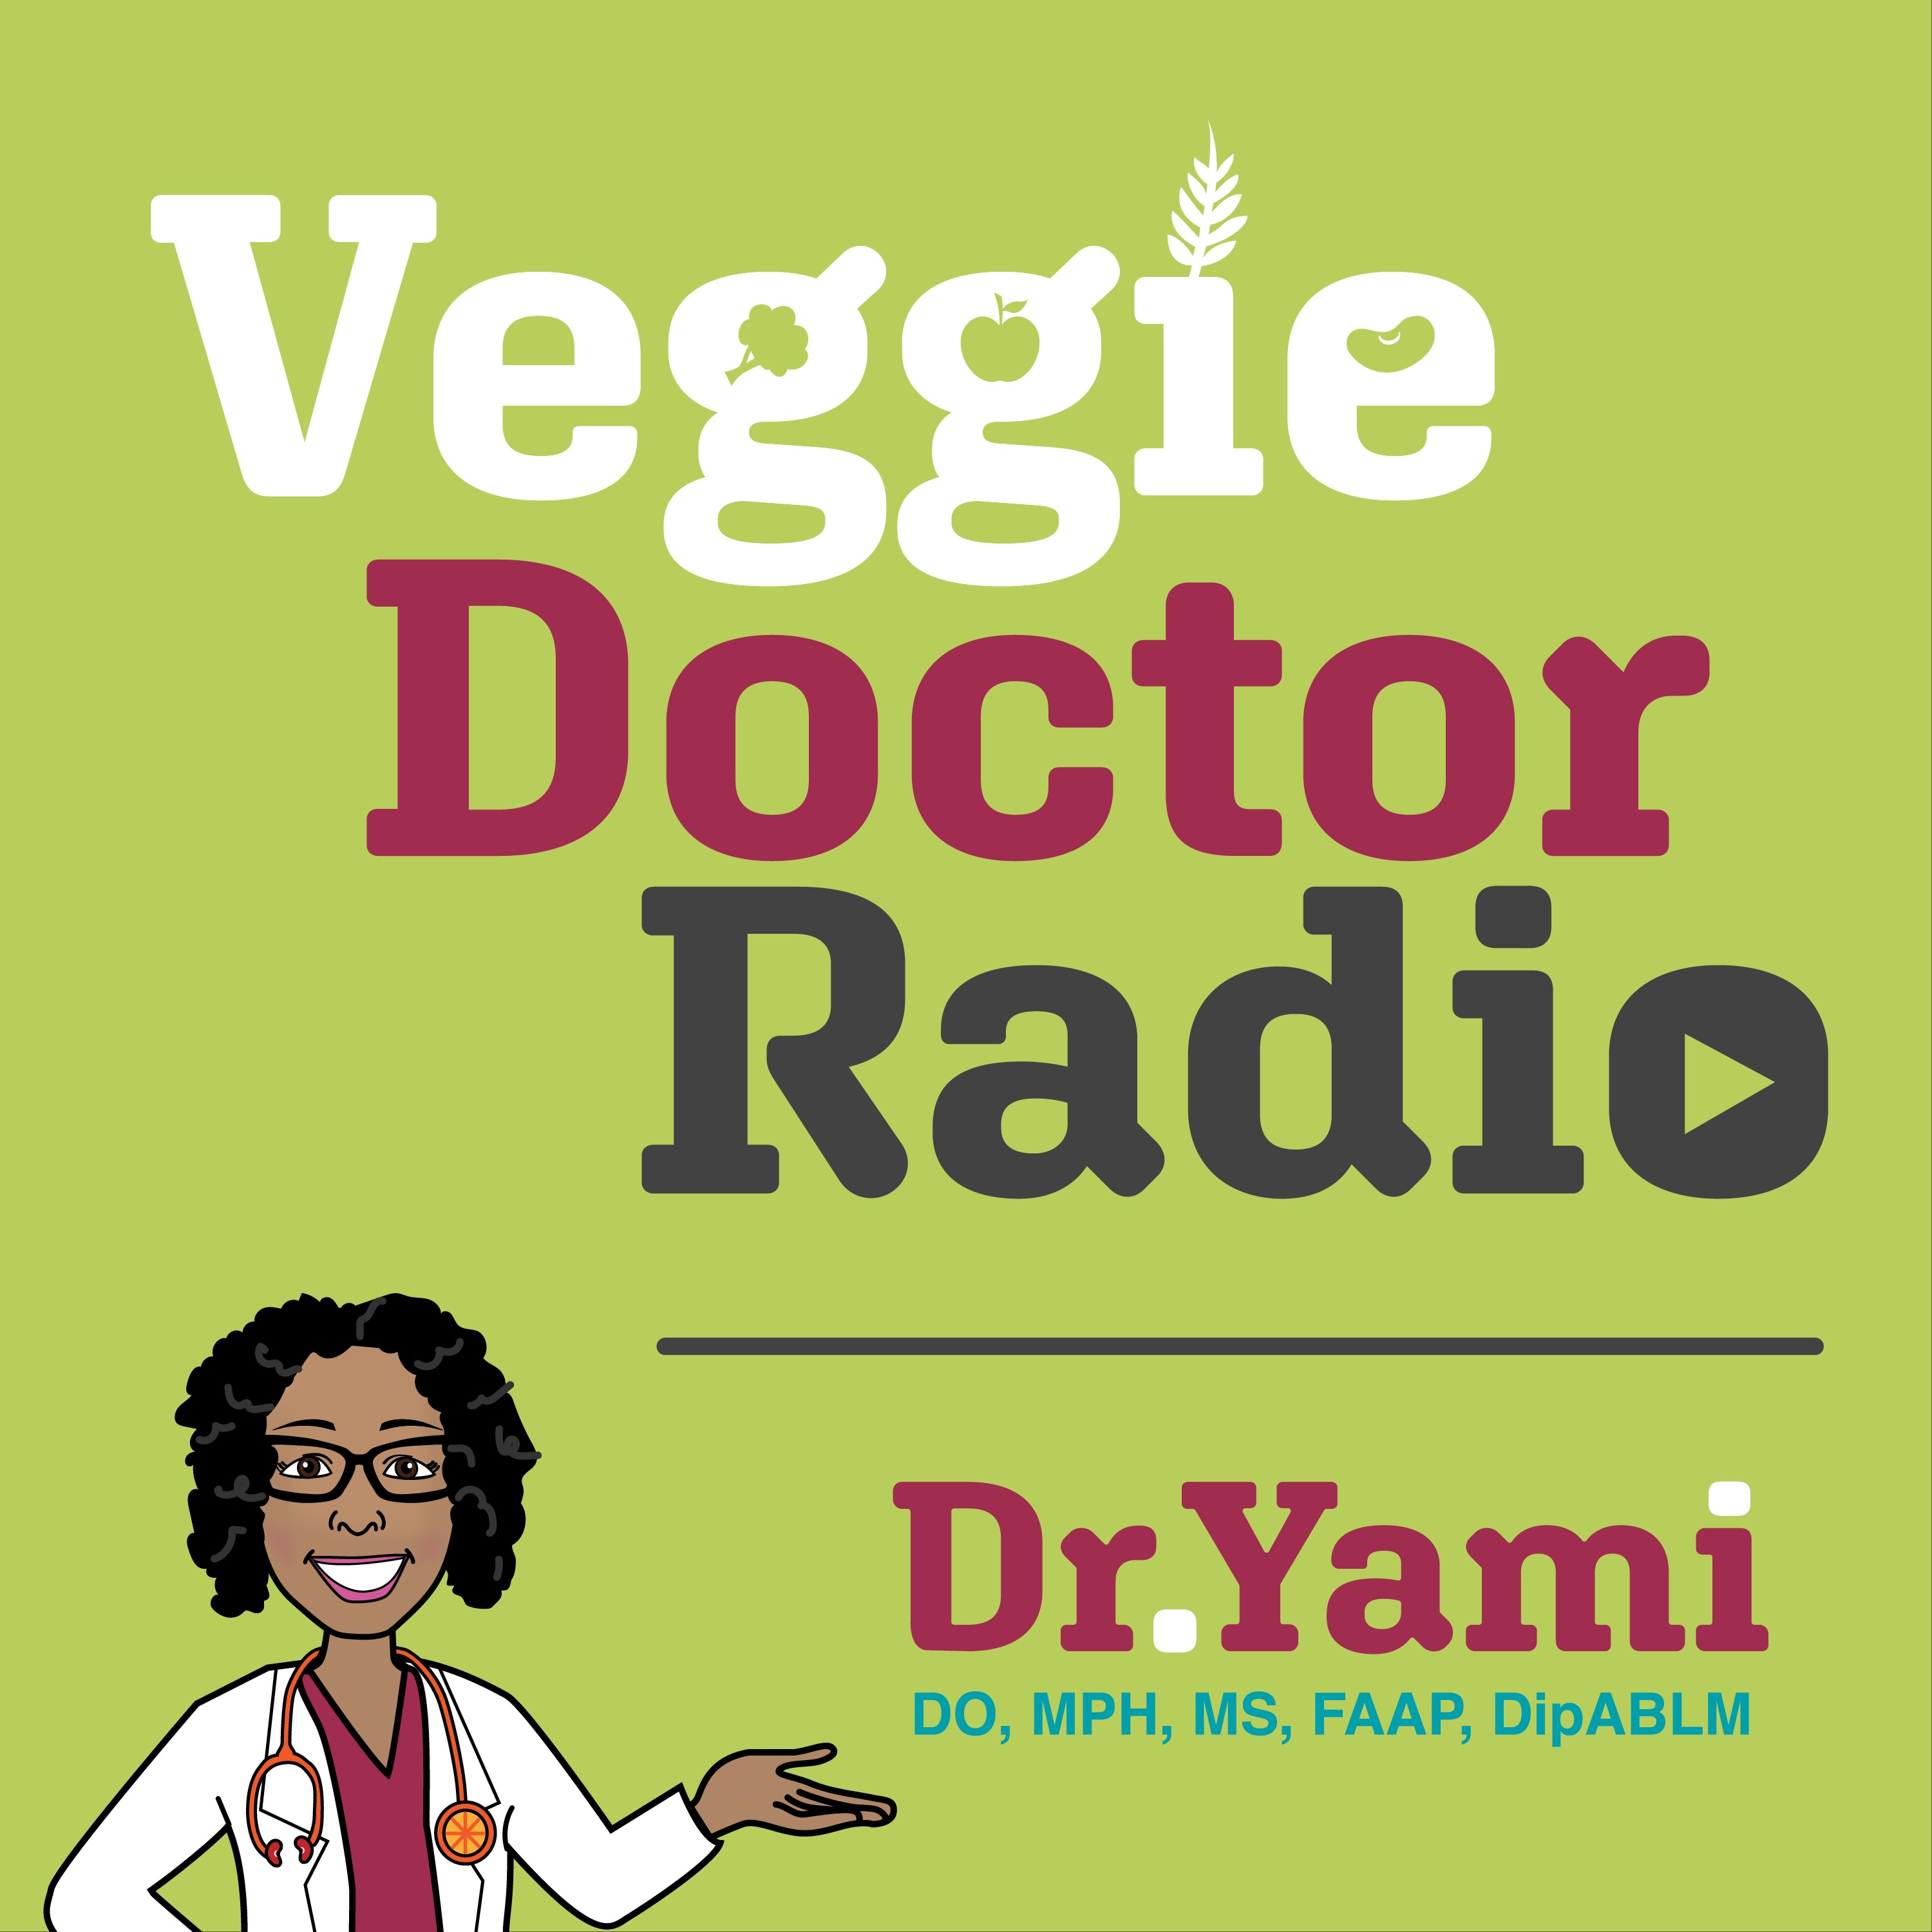 201: From Cheese Addict to Faithful Plant-Based Advocate: Dr. Judy Brangman, The Plant-Based MD (Veggie Doctor Radio)